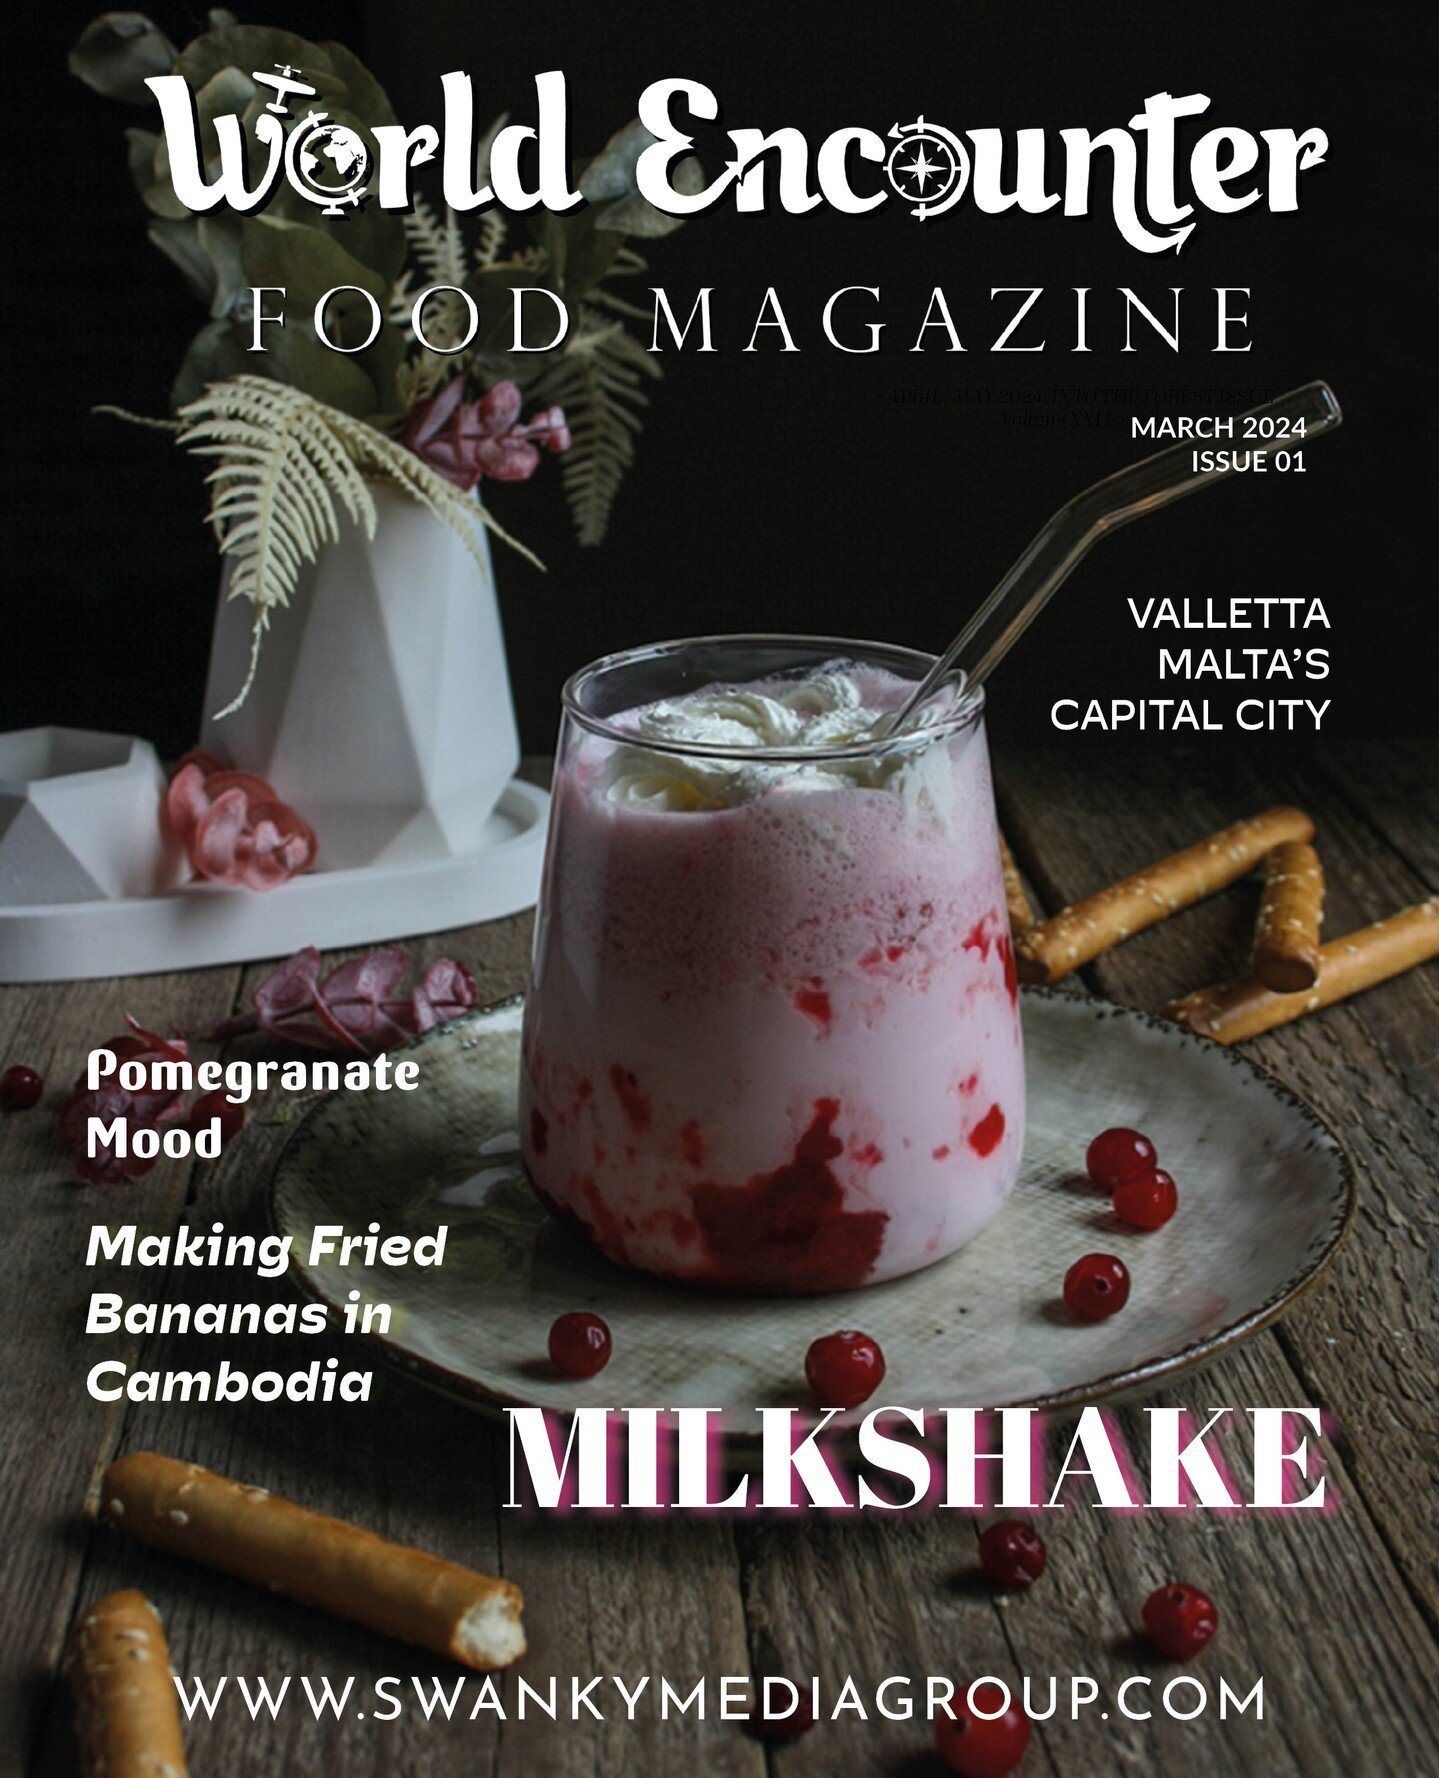 OUR MARCH ISSUES HAVE ARRIVED 🥛⁠
⁠
World Encounter Magazine - March 2024: The World Food Edition Issue 1⁠
⁠
'Milkshake'⁠
⁠
Accessory Designer/Creative Director/Retoucher/Photographer: Babaeva Julia⁠
IG: @juli_life_photo⁠
⁠
👉🏻 Purchase our Print &a